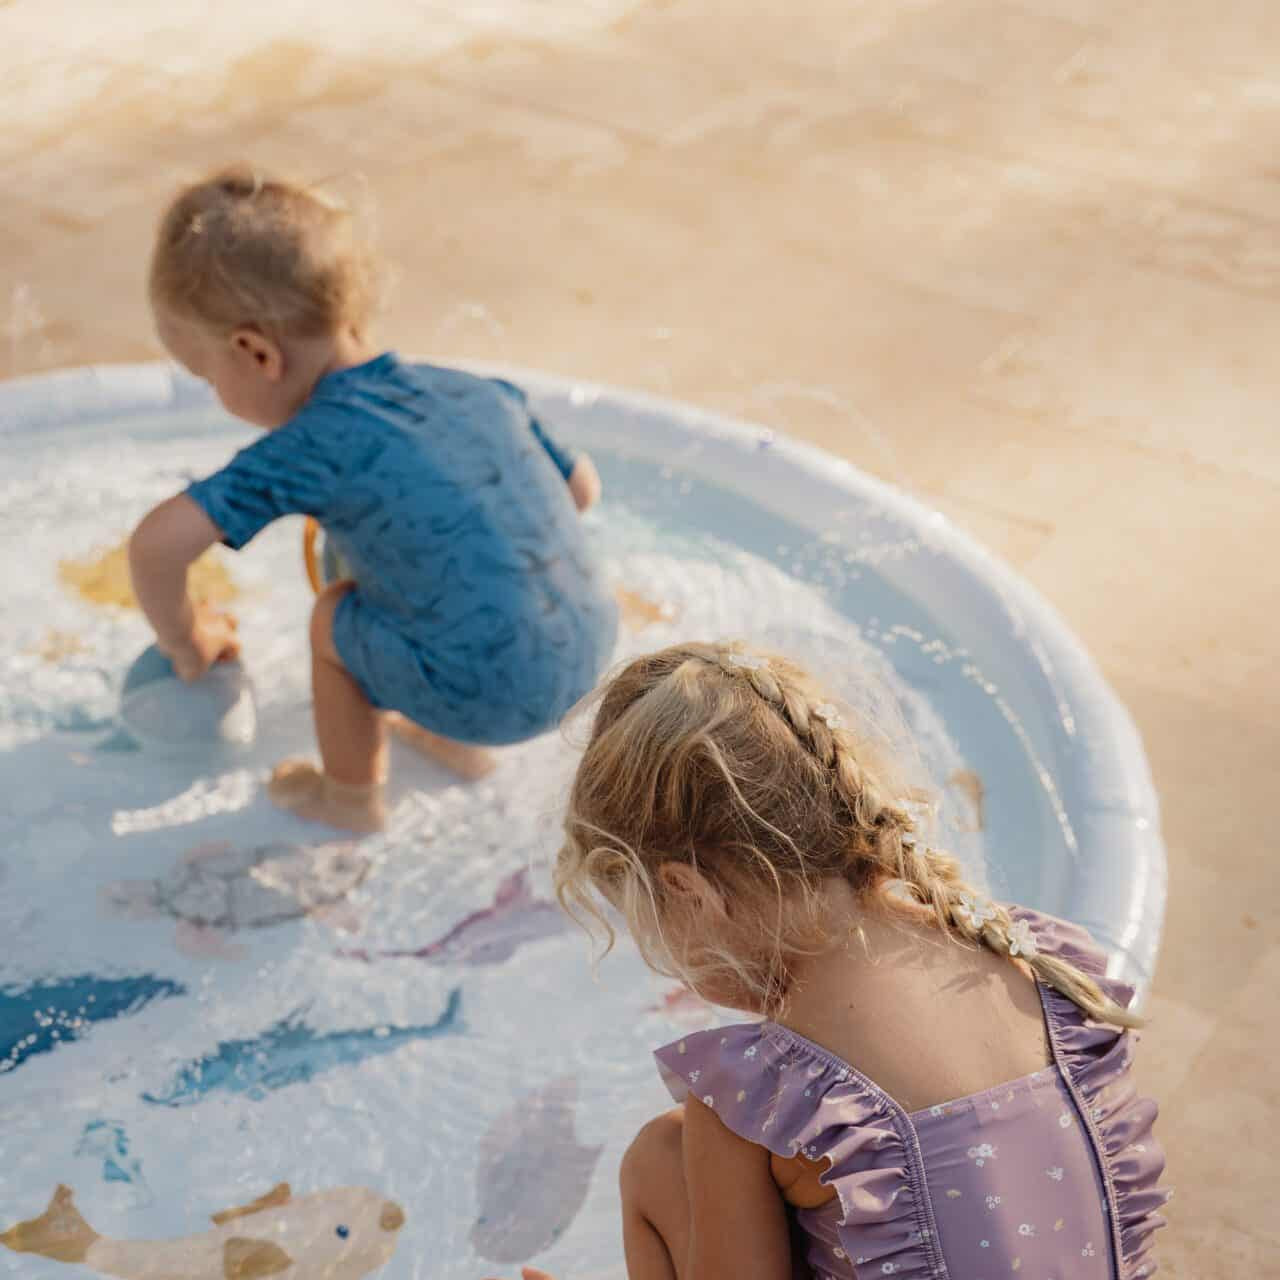 Girl wearing mauve Little Dutch swimsuit playing in a kiddie pool with another child.